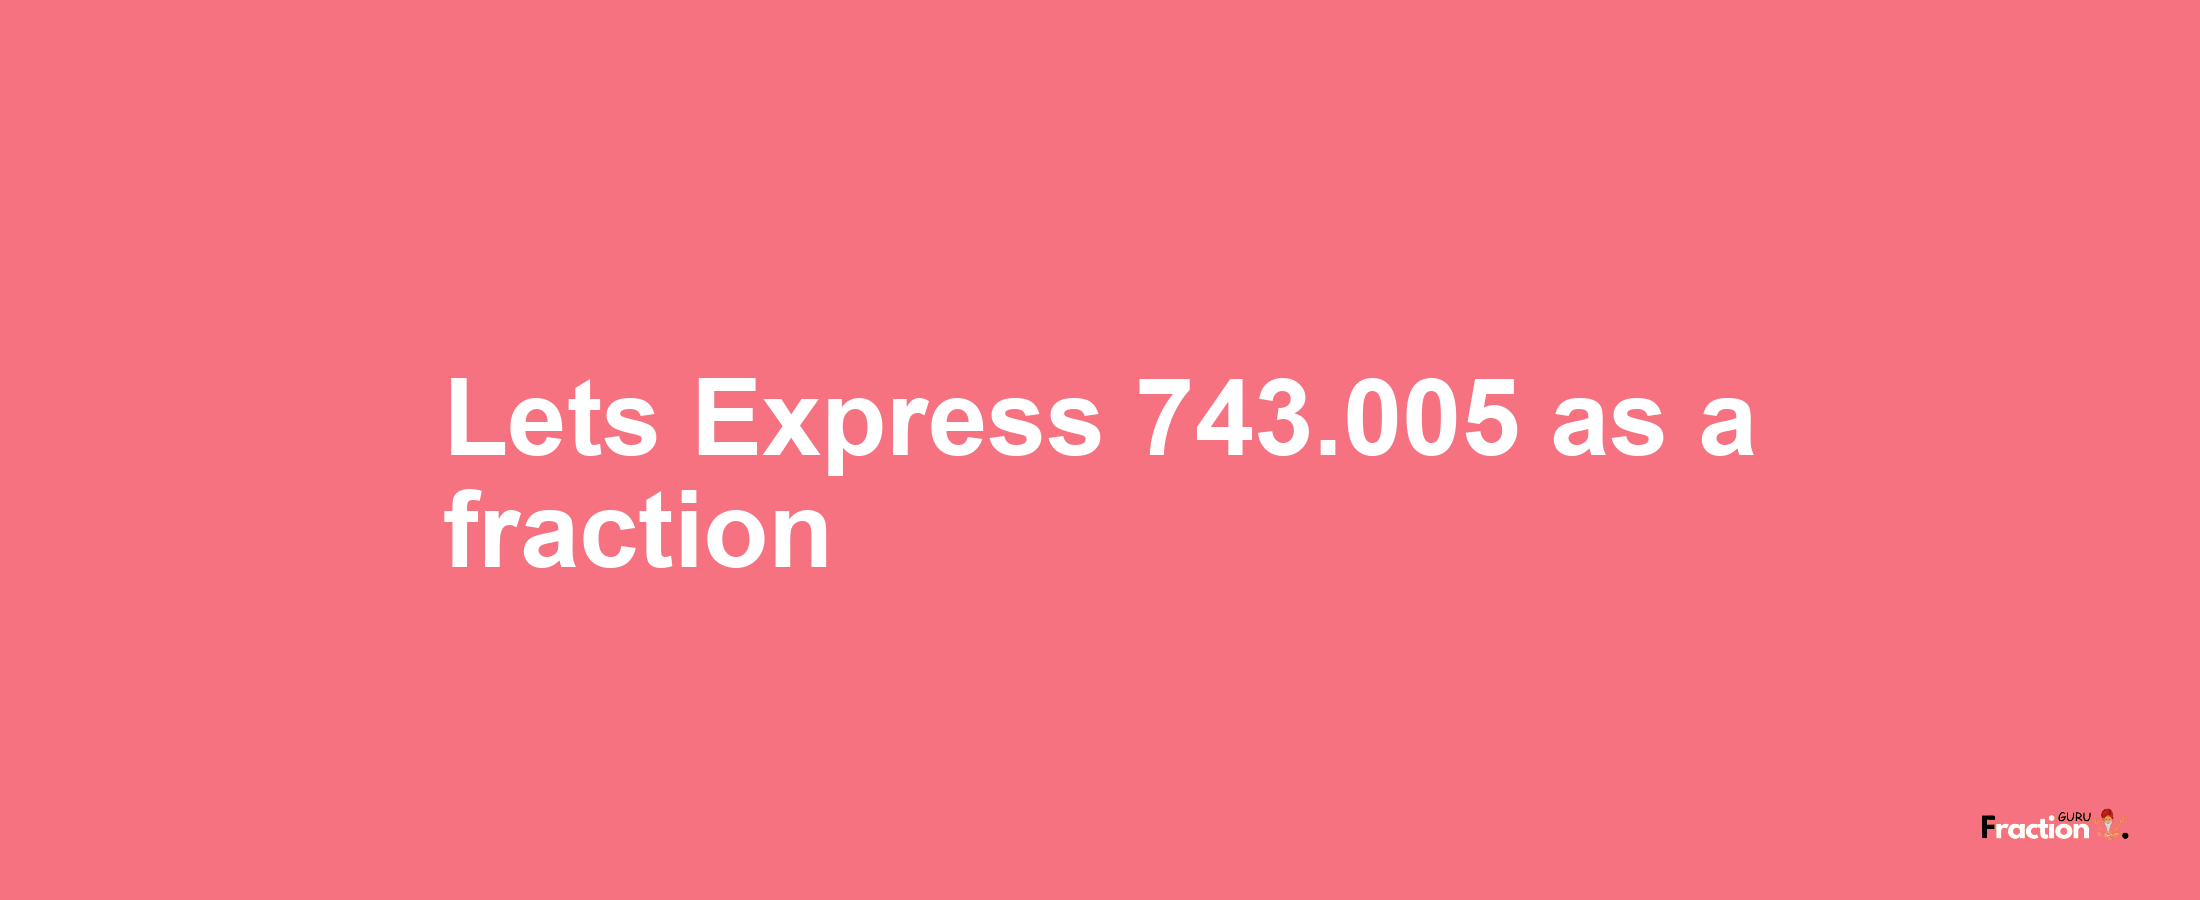 Lets Express 743.005 as afraction